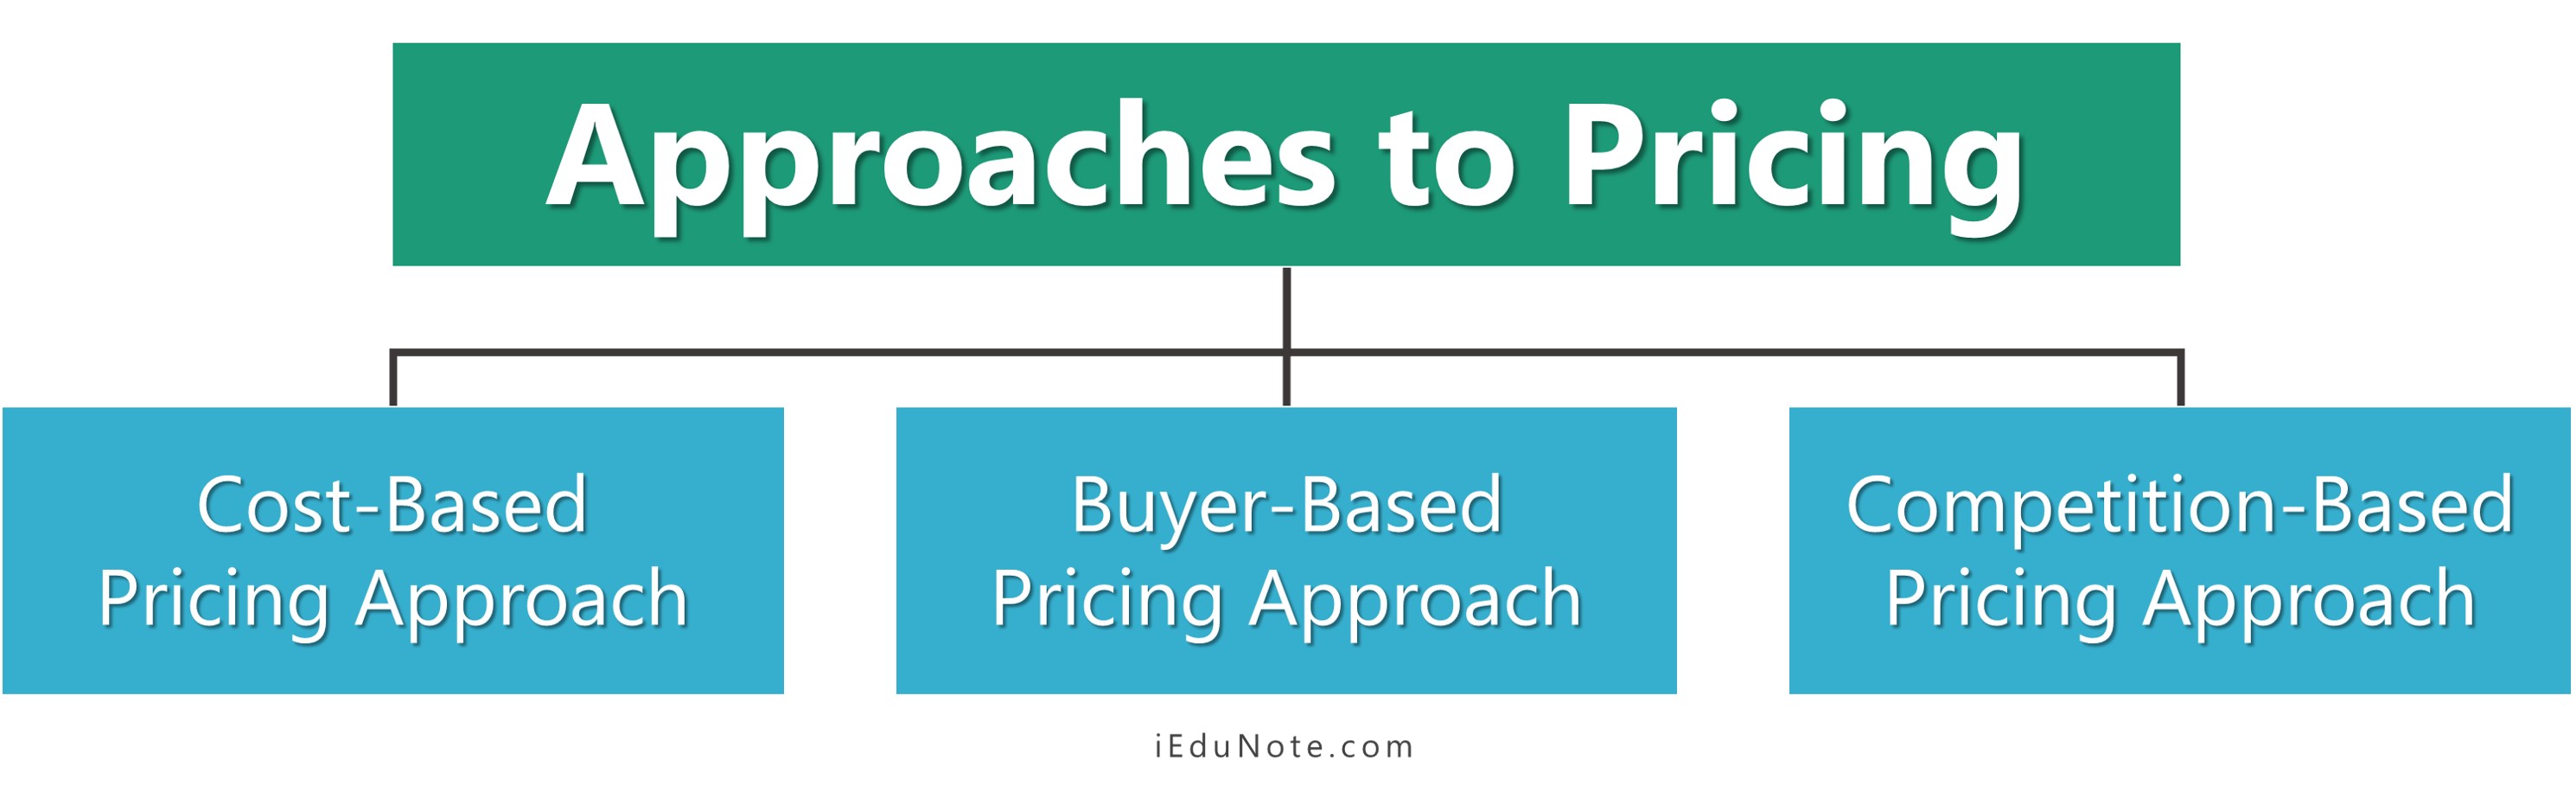 Price methods. Principles of pricing. Product pricing in International Business pics.